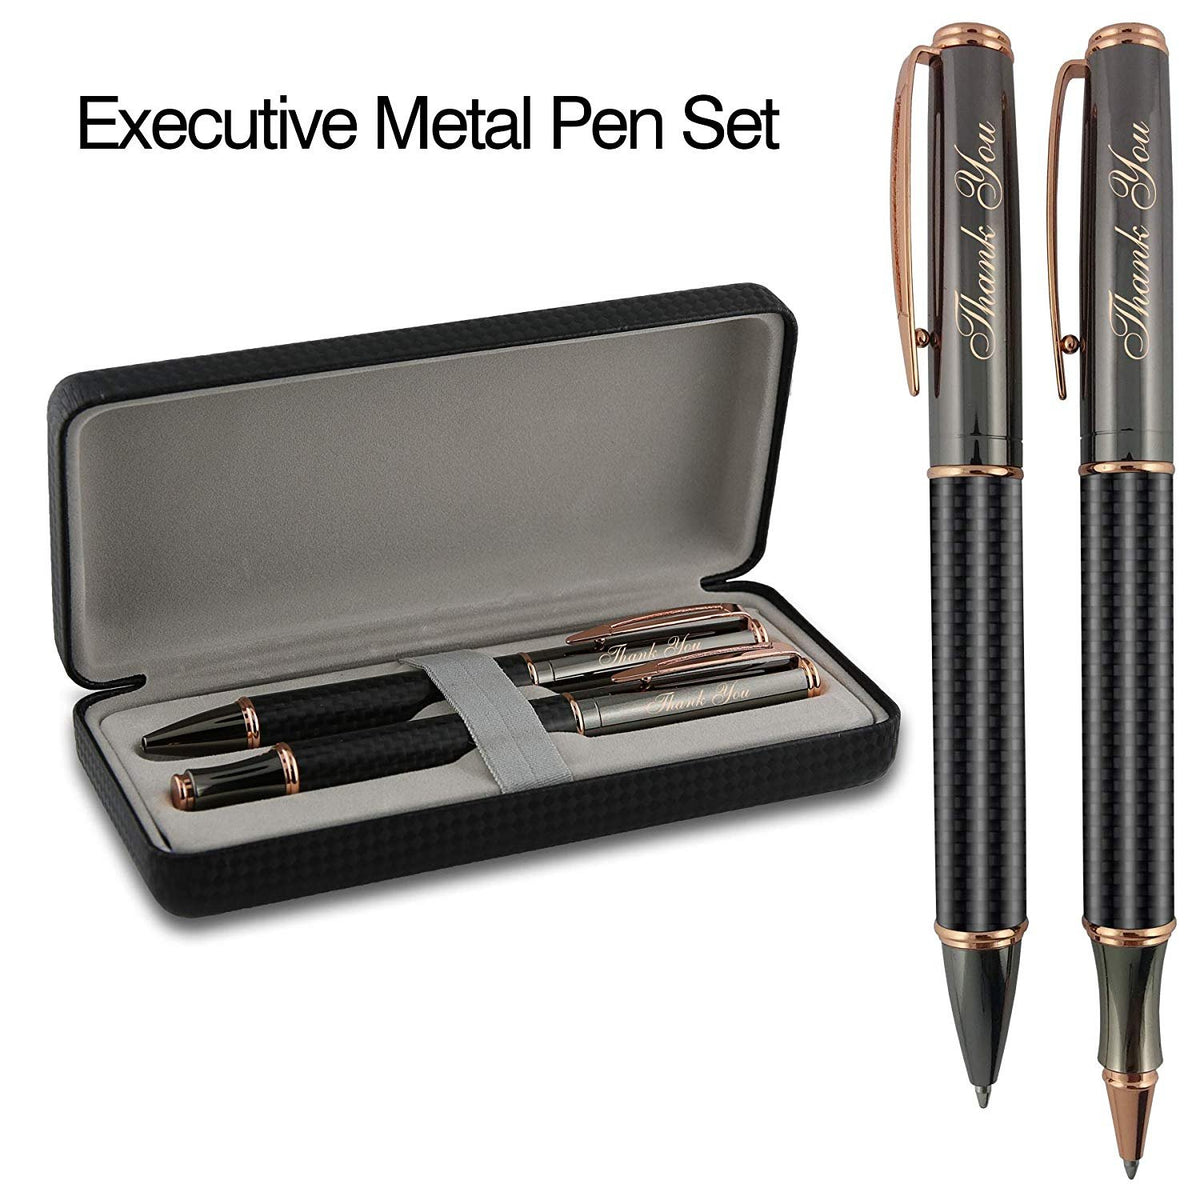 Personalised Two Tone Stratton Roller Ball & Fountain Pen Gift Set